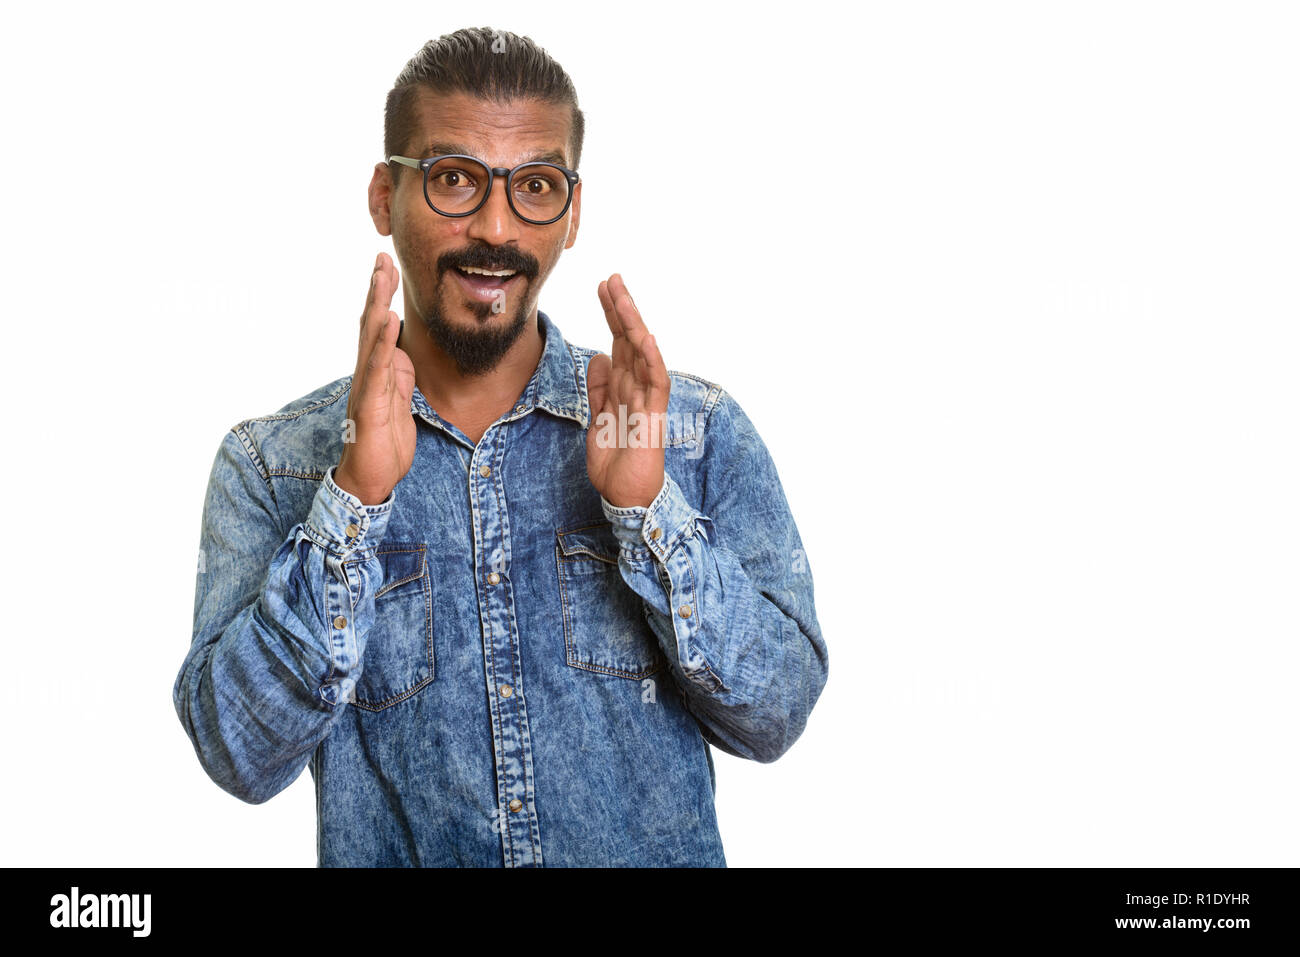 Young happy Indian man looking surprised studio portrait against white background Stock Photo